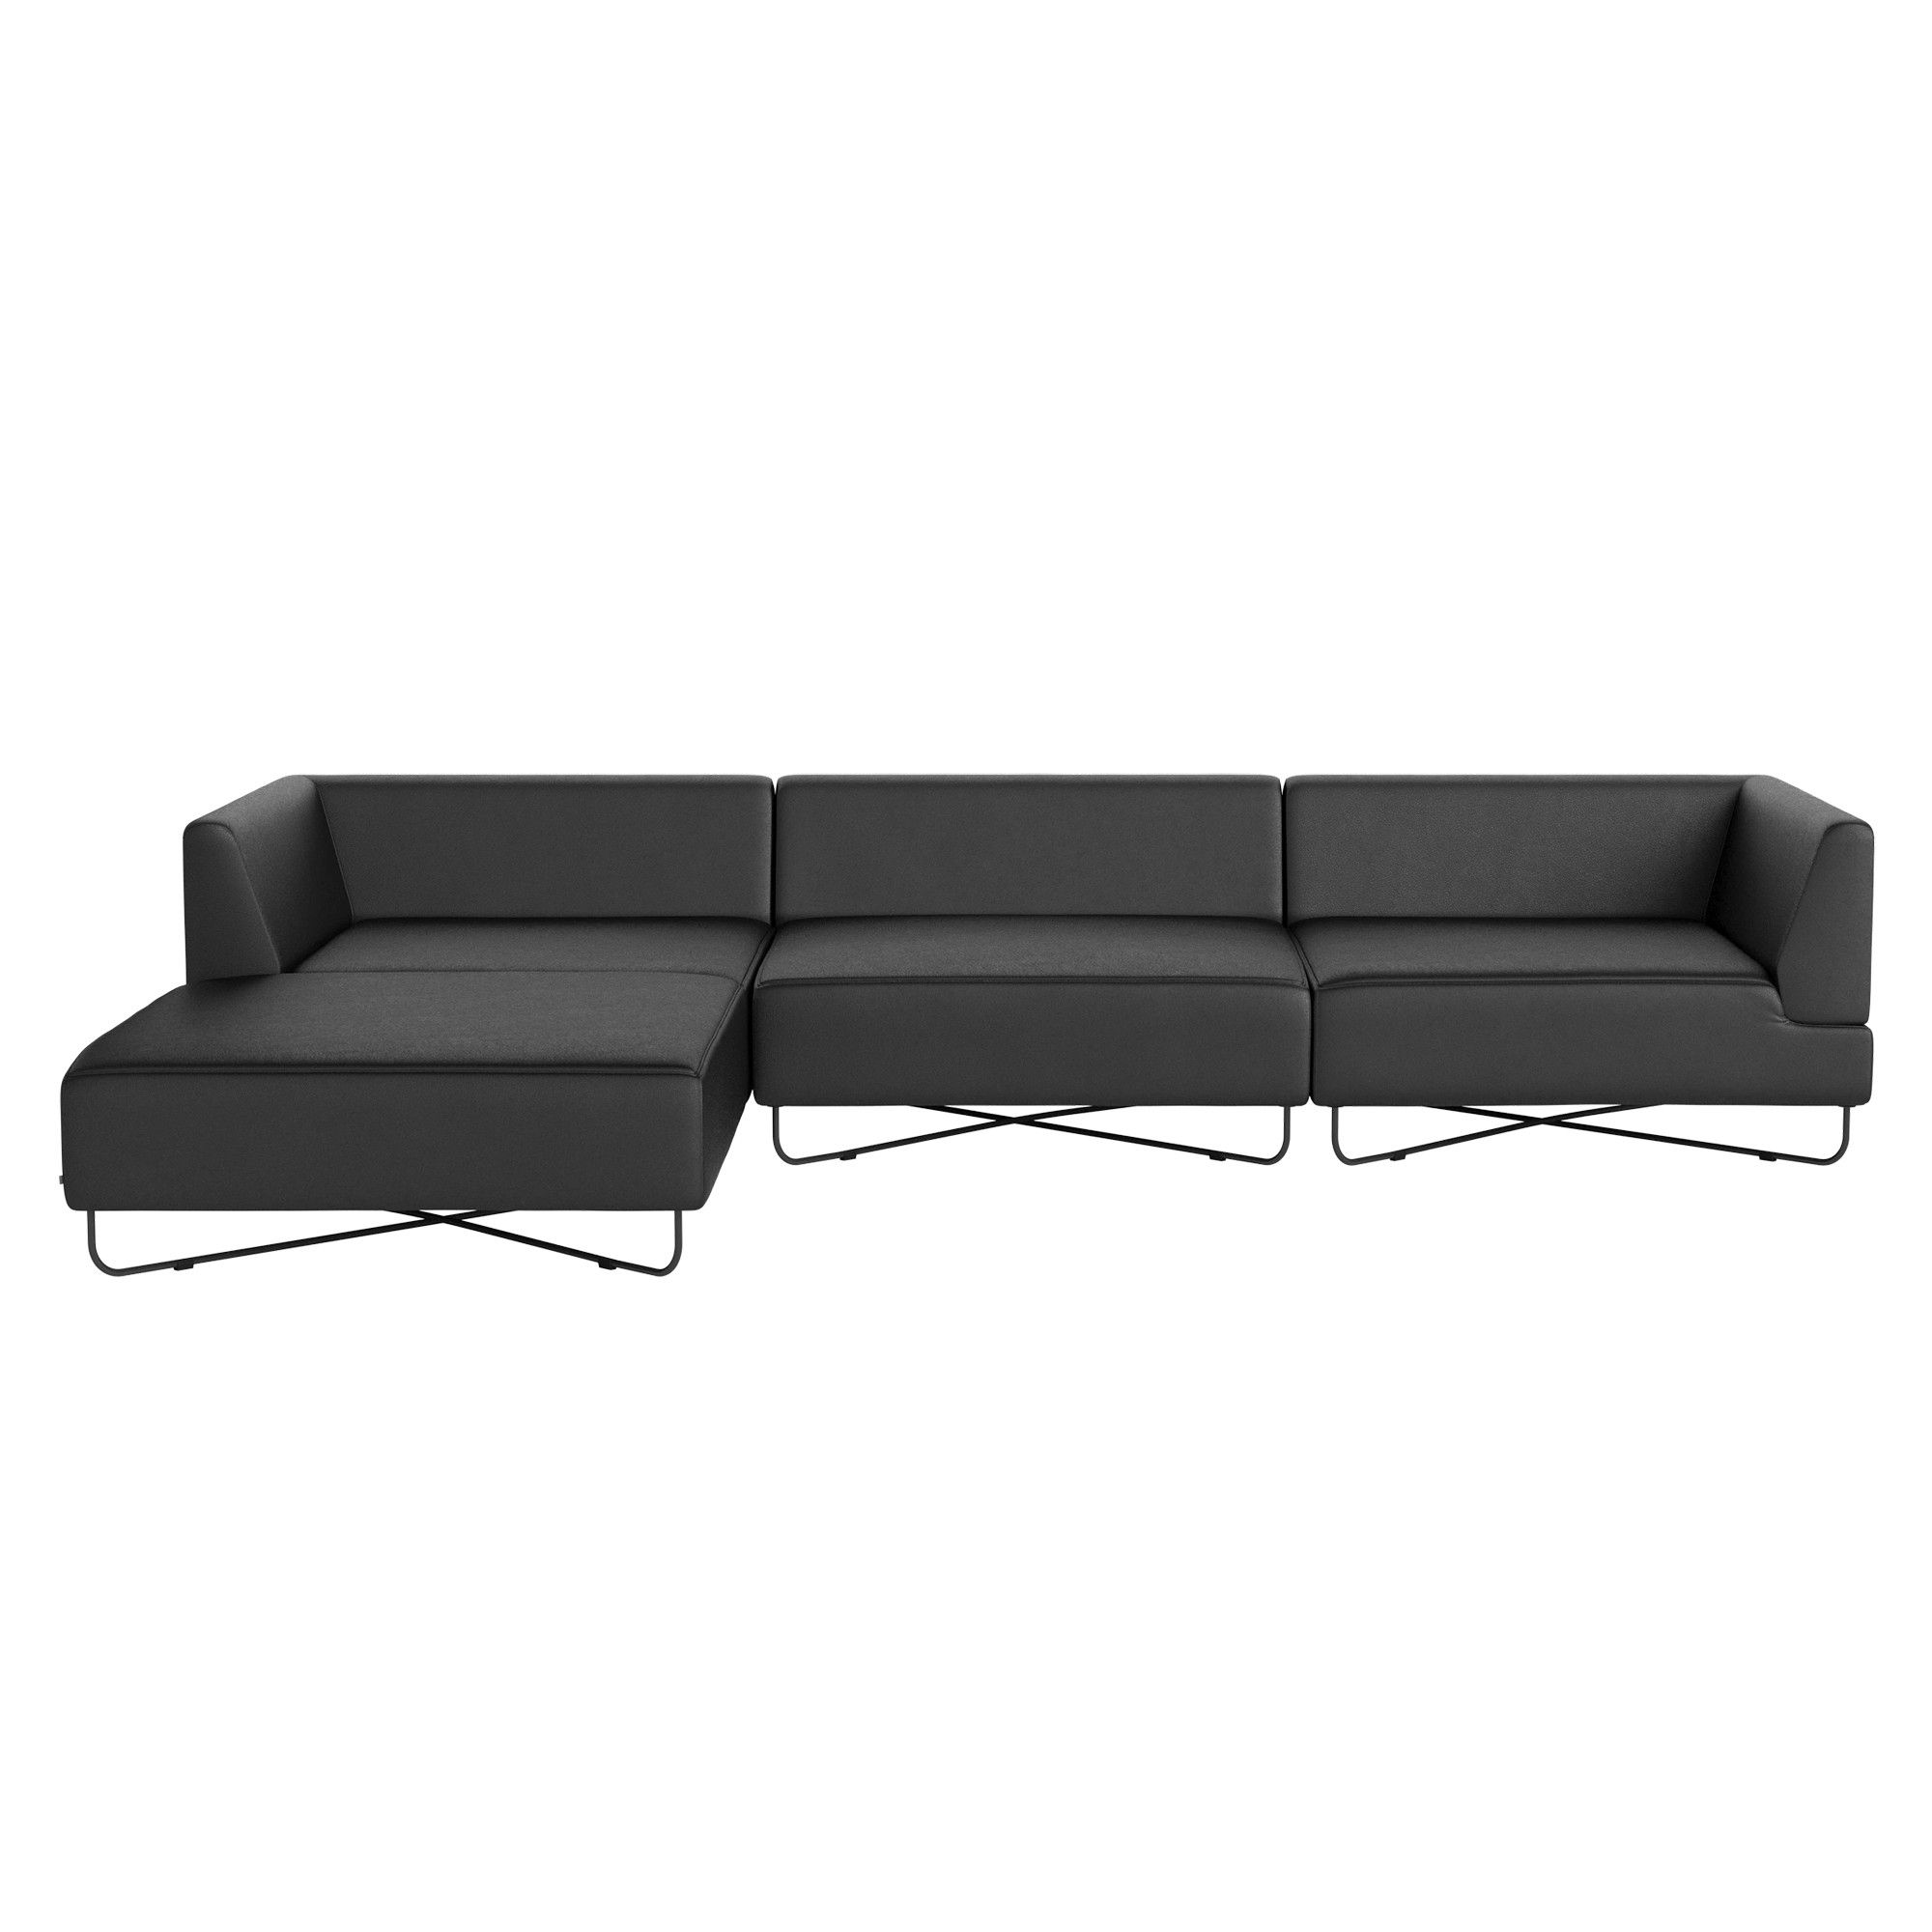 Orlando 3 Seaters Sofa With Chaise Longue – Bolia With Regard To Sofas With Double Chaises (View 15 of 20)